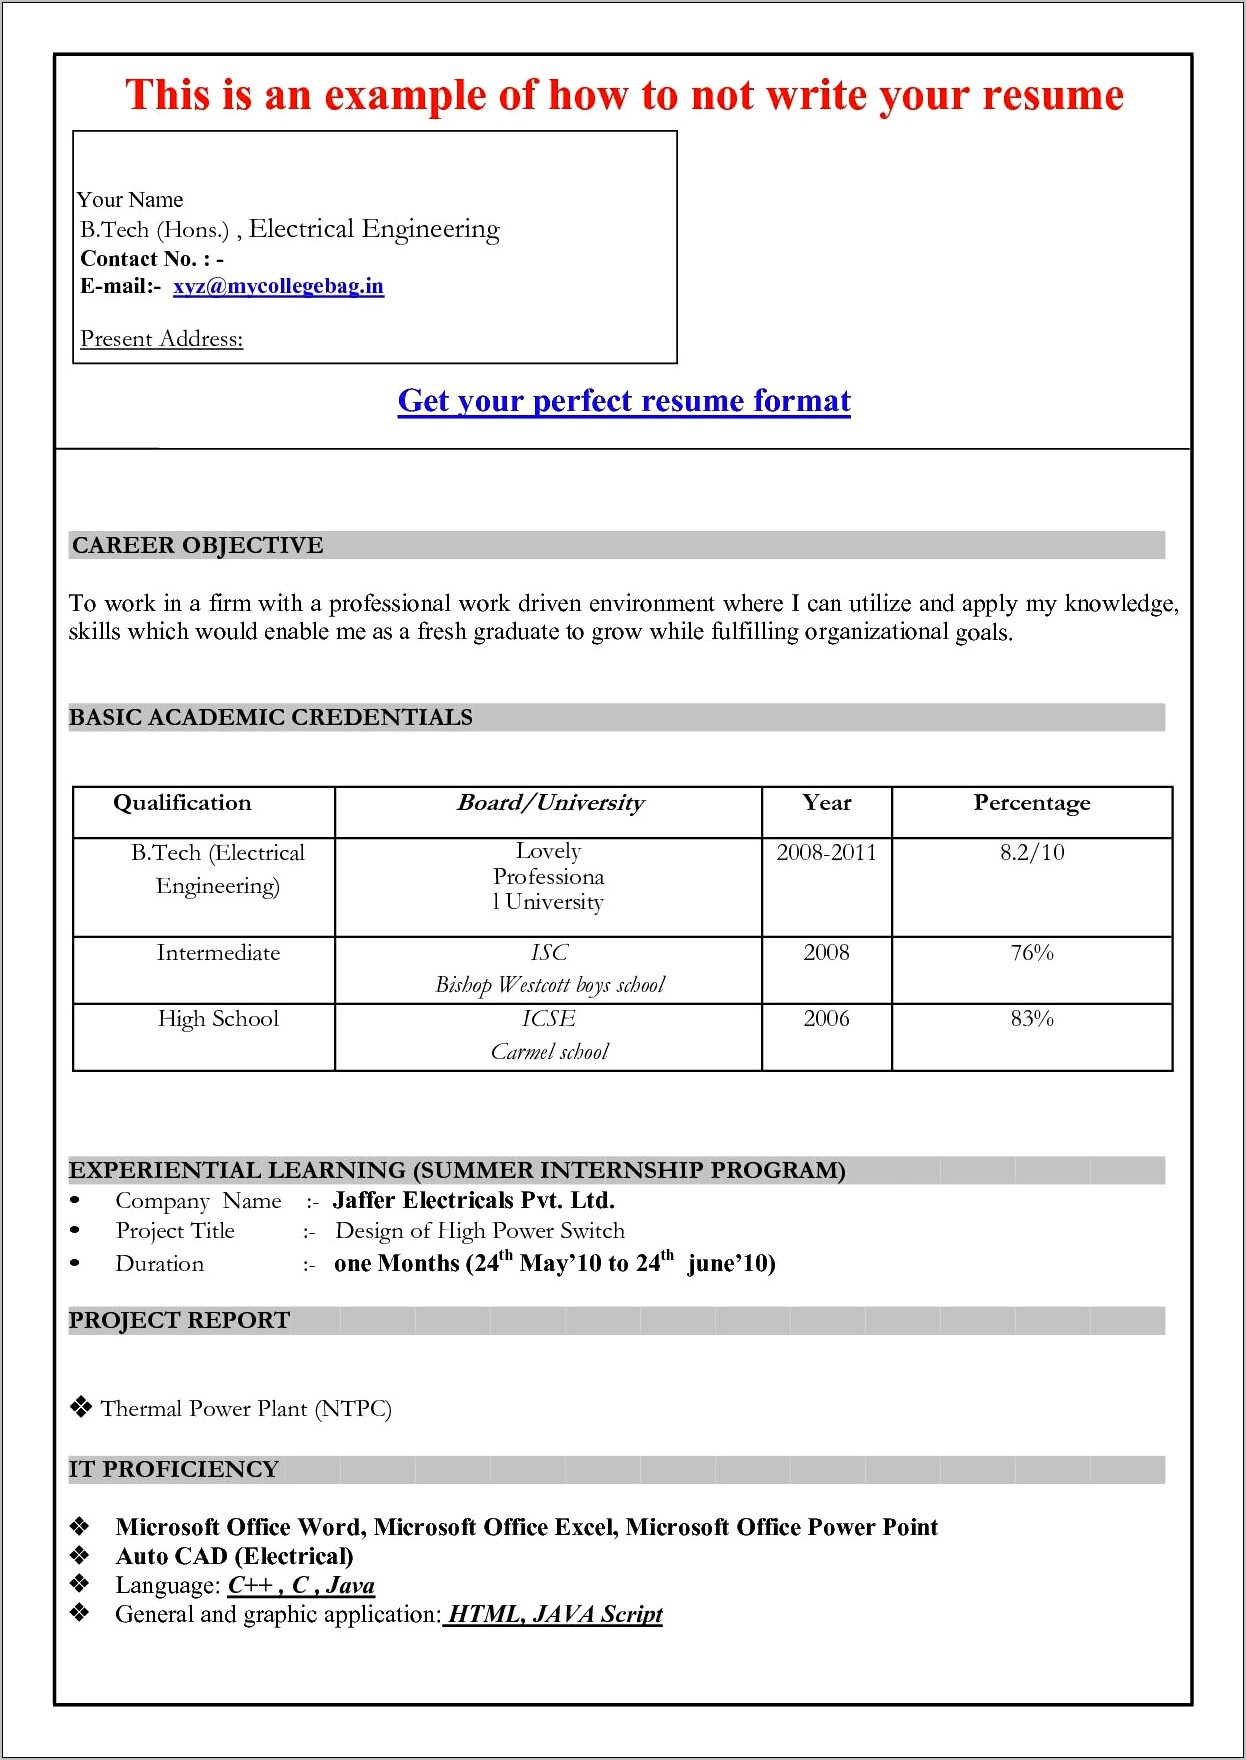 Resume Format For Freshers Word File Free Download